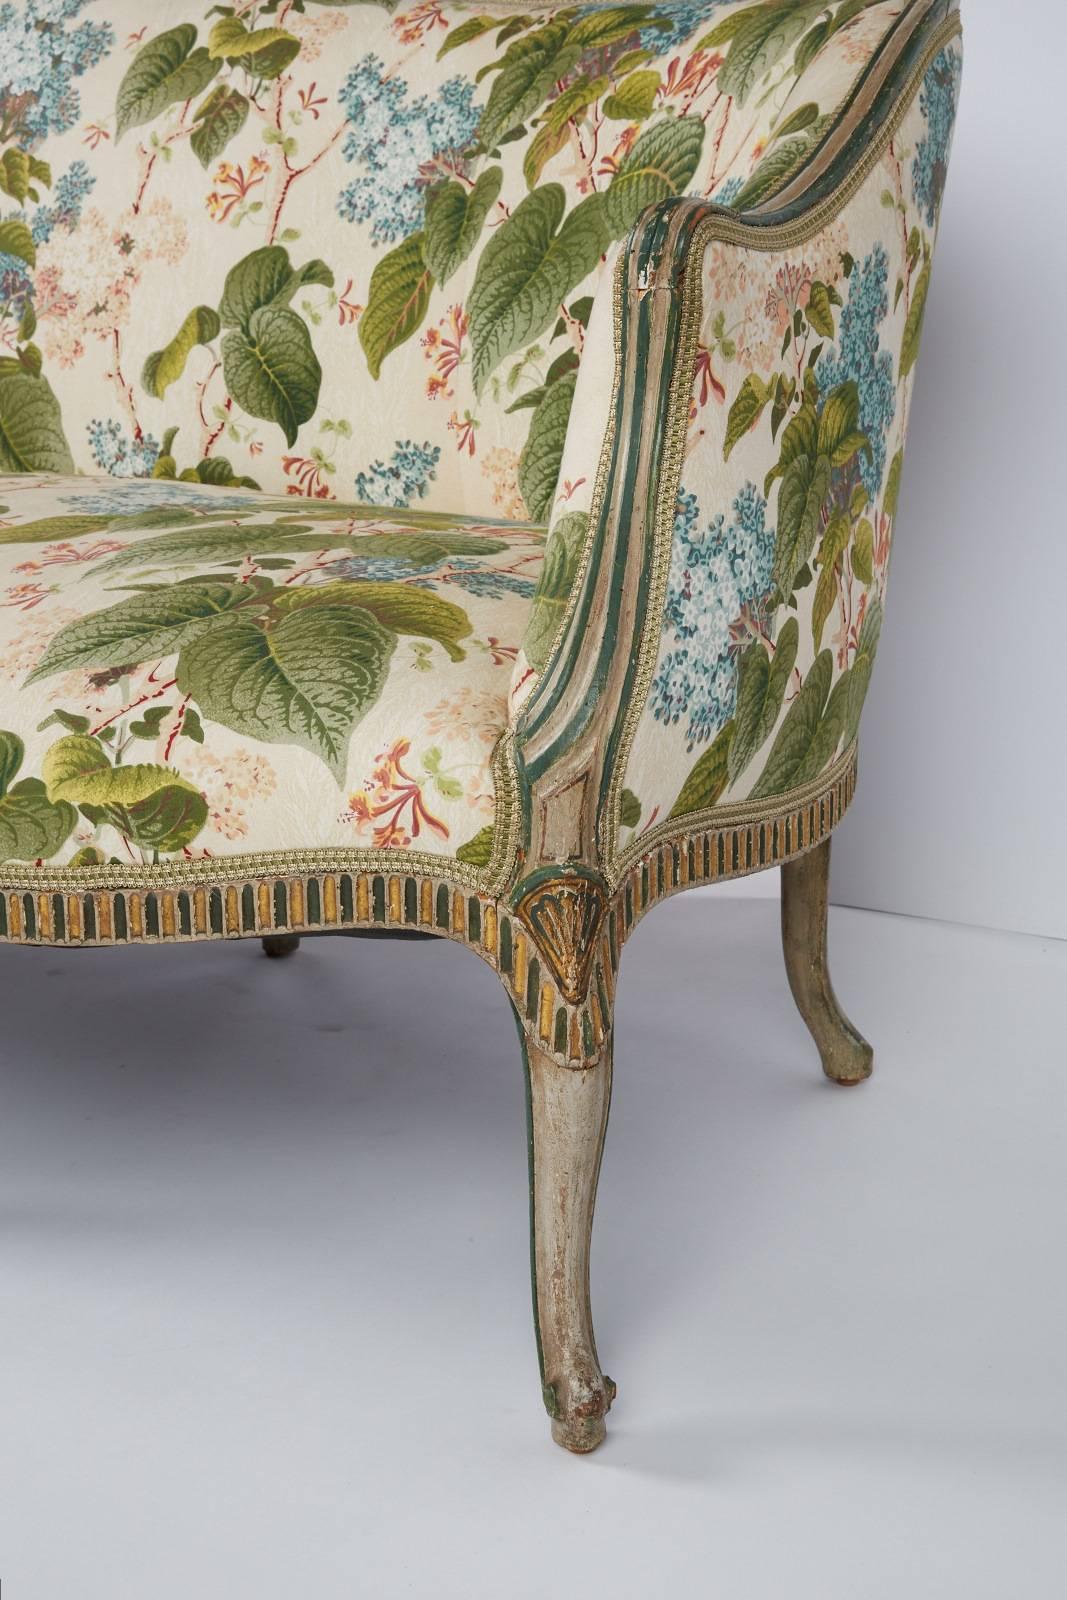 A beautiful George III grey and green painted settee with gilt detailing. This piece is currently upholstered in muslin, not the fabric shown in the photos,
circa early 18th century.